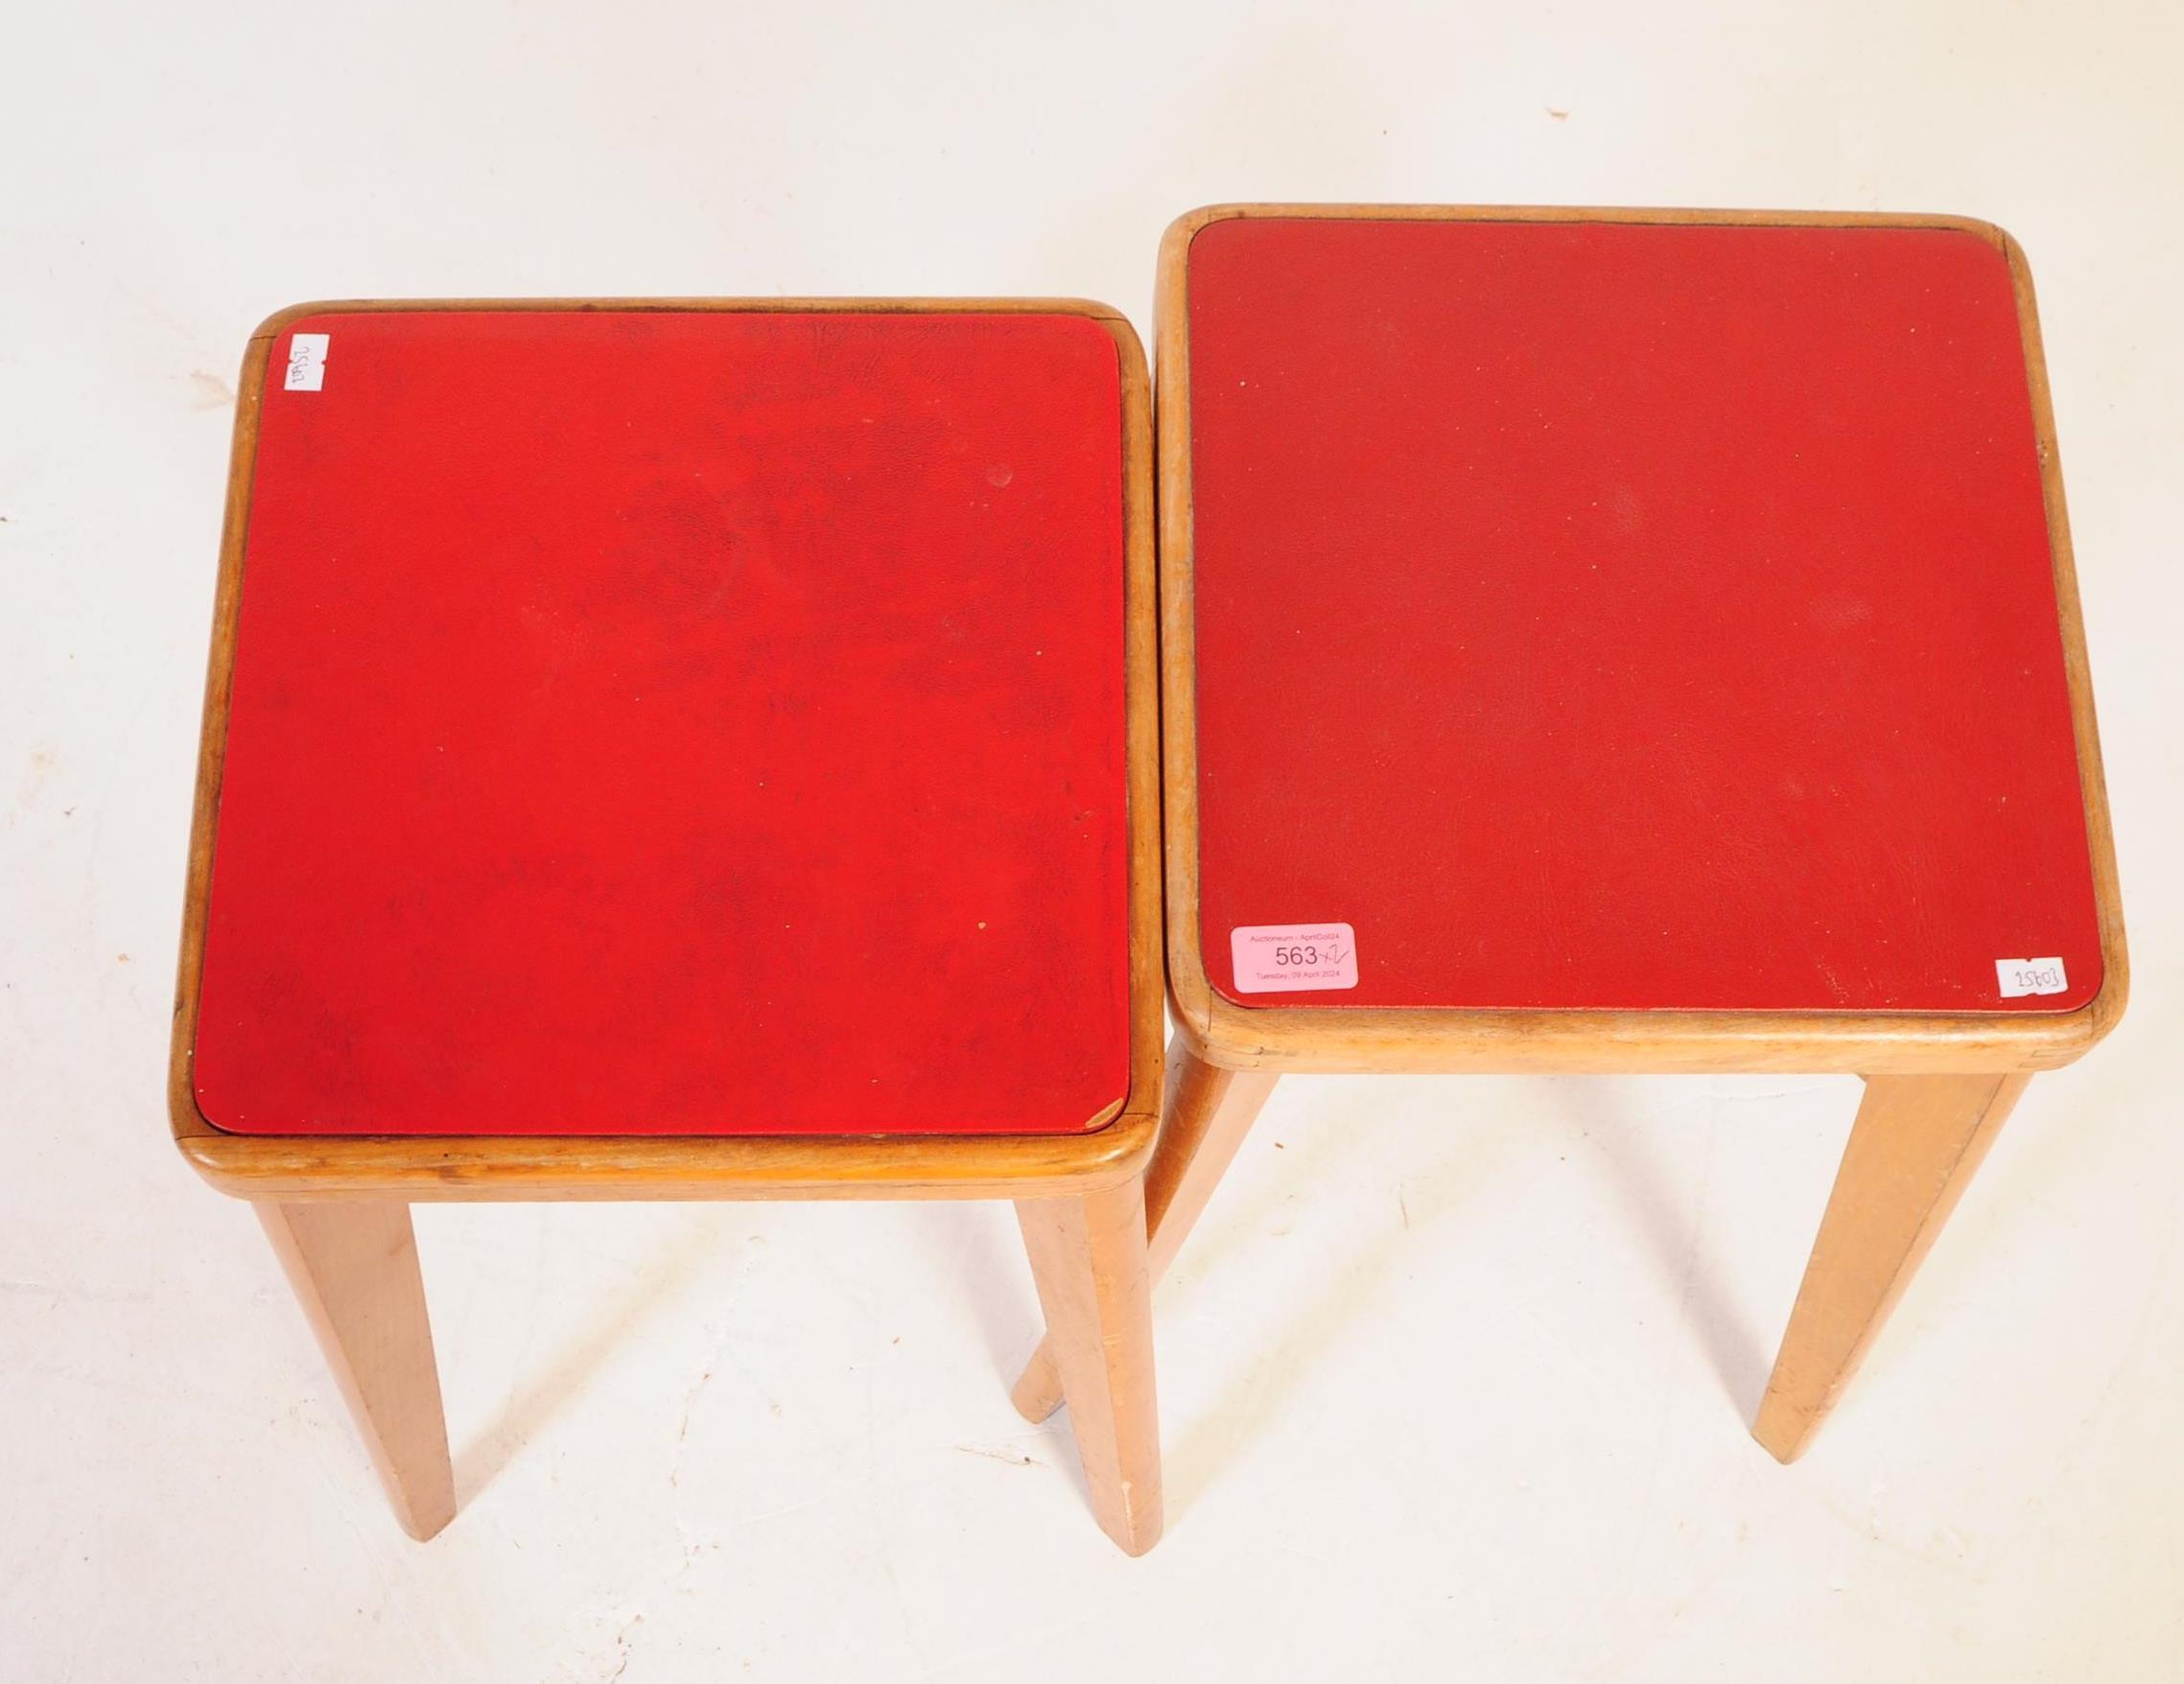 PAIR OF MID CENTURY YUGOSLAVIAN STOOLS WITH RED VINYL - Image 3 of 4